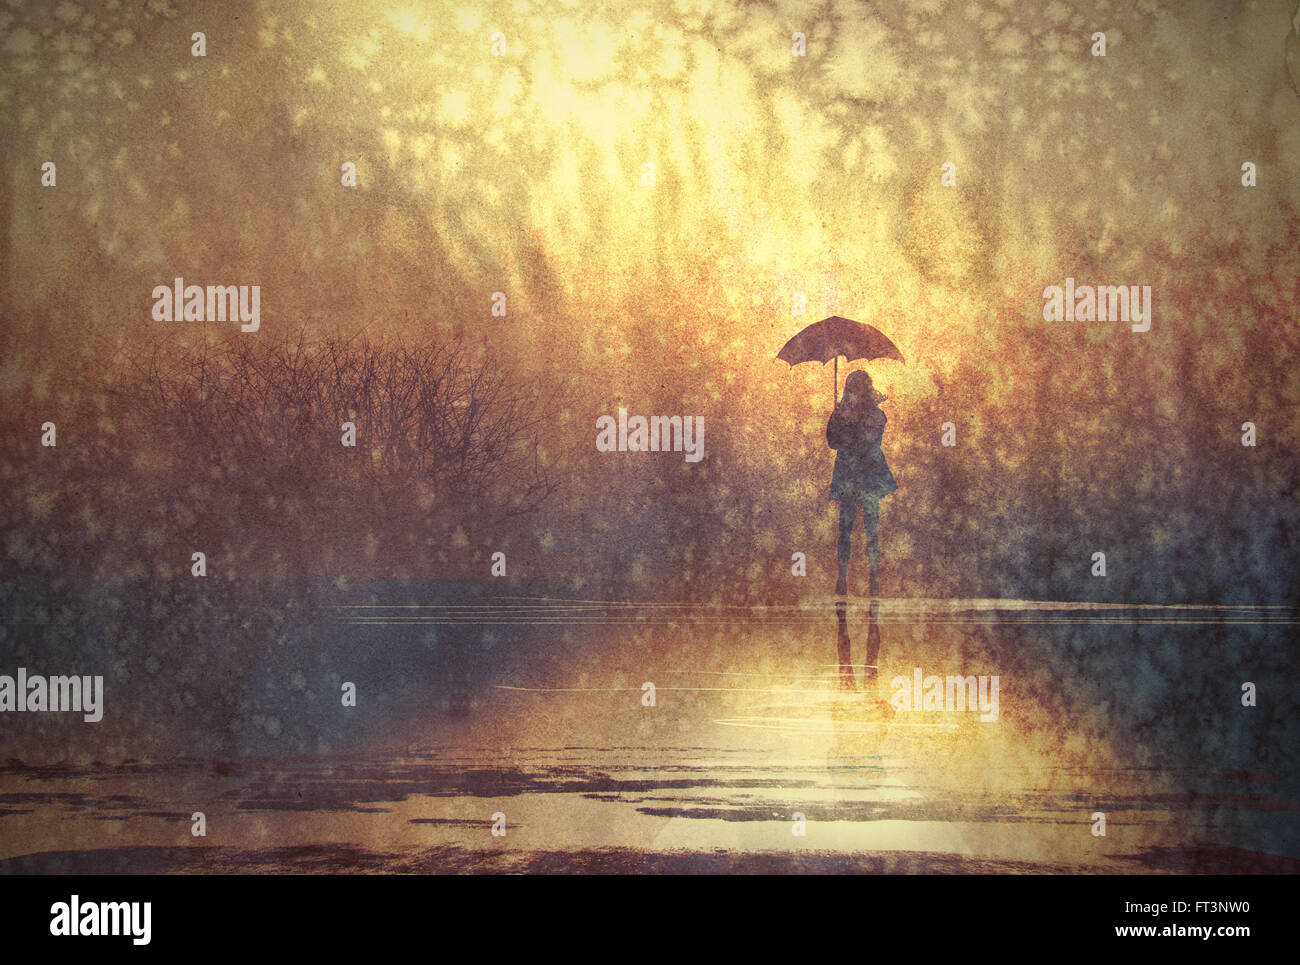 lonely woman with umbrella in lake,illustration Stock Photo